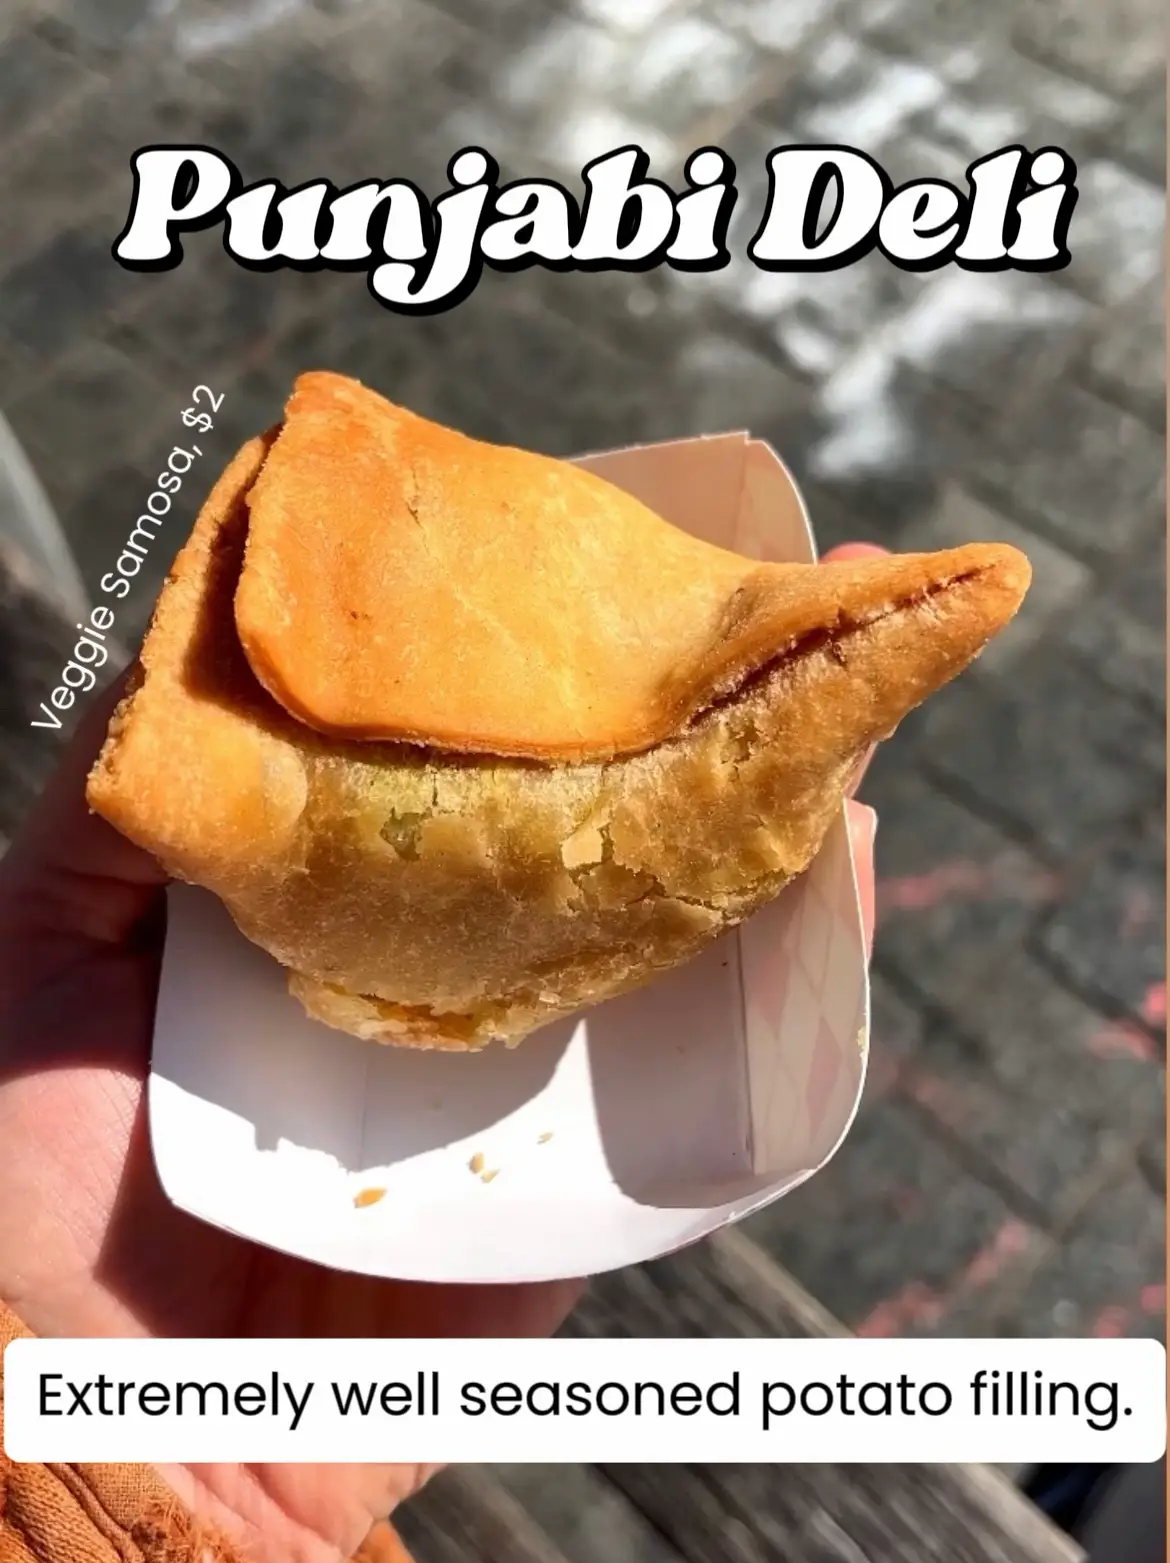  A person is holding a small container of Punjabi Deli Veggie Samosa.